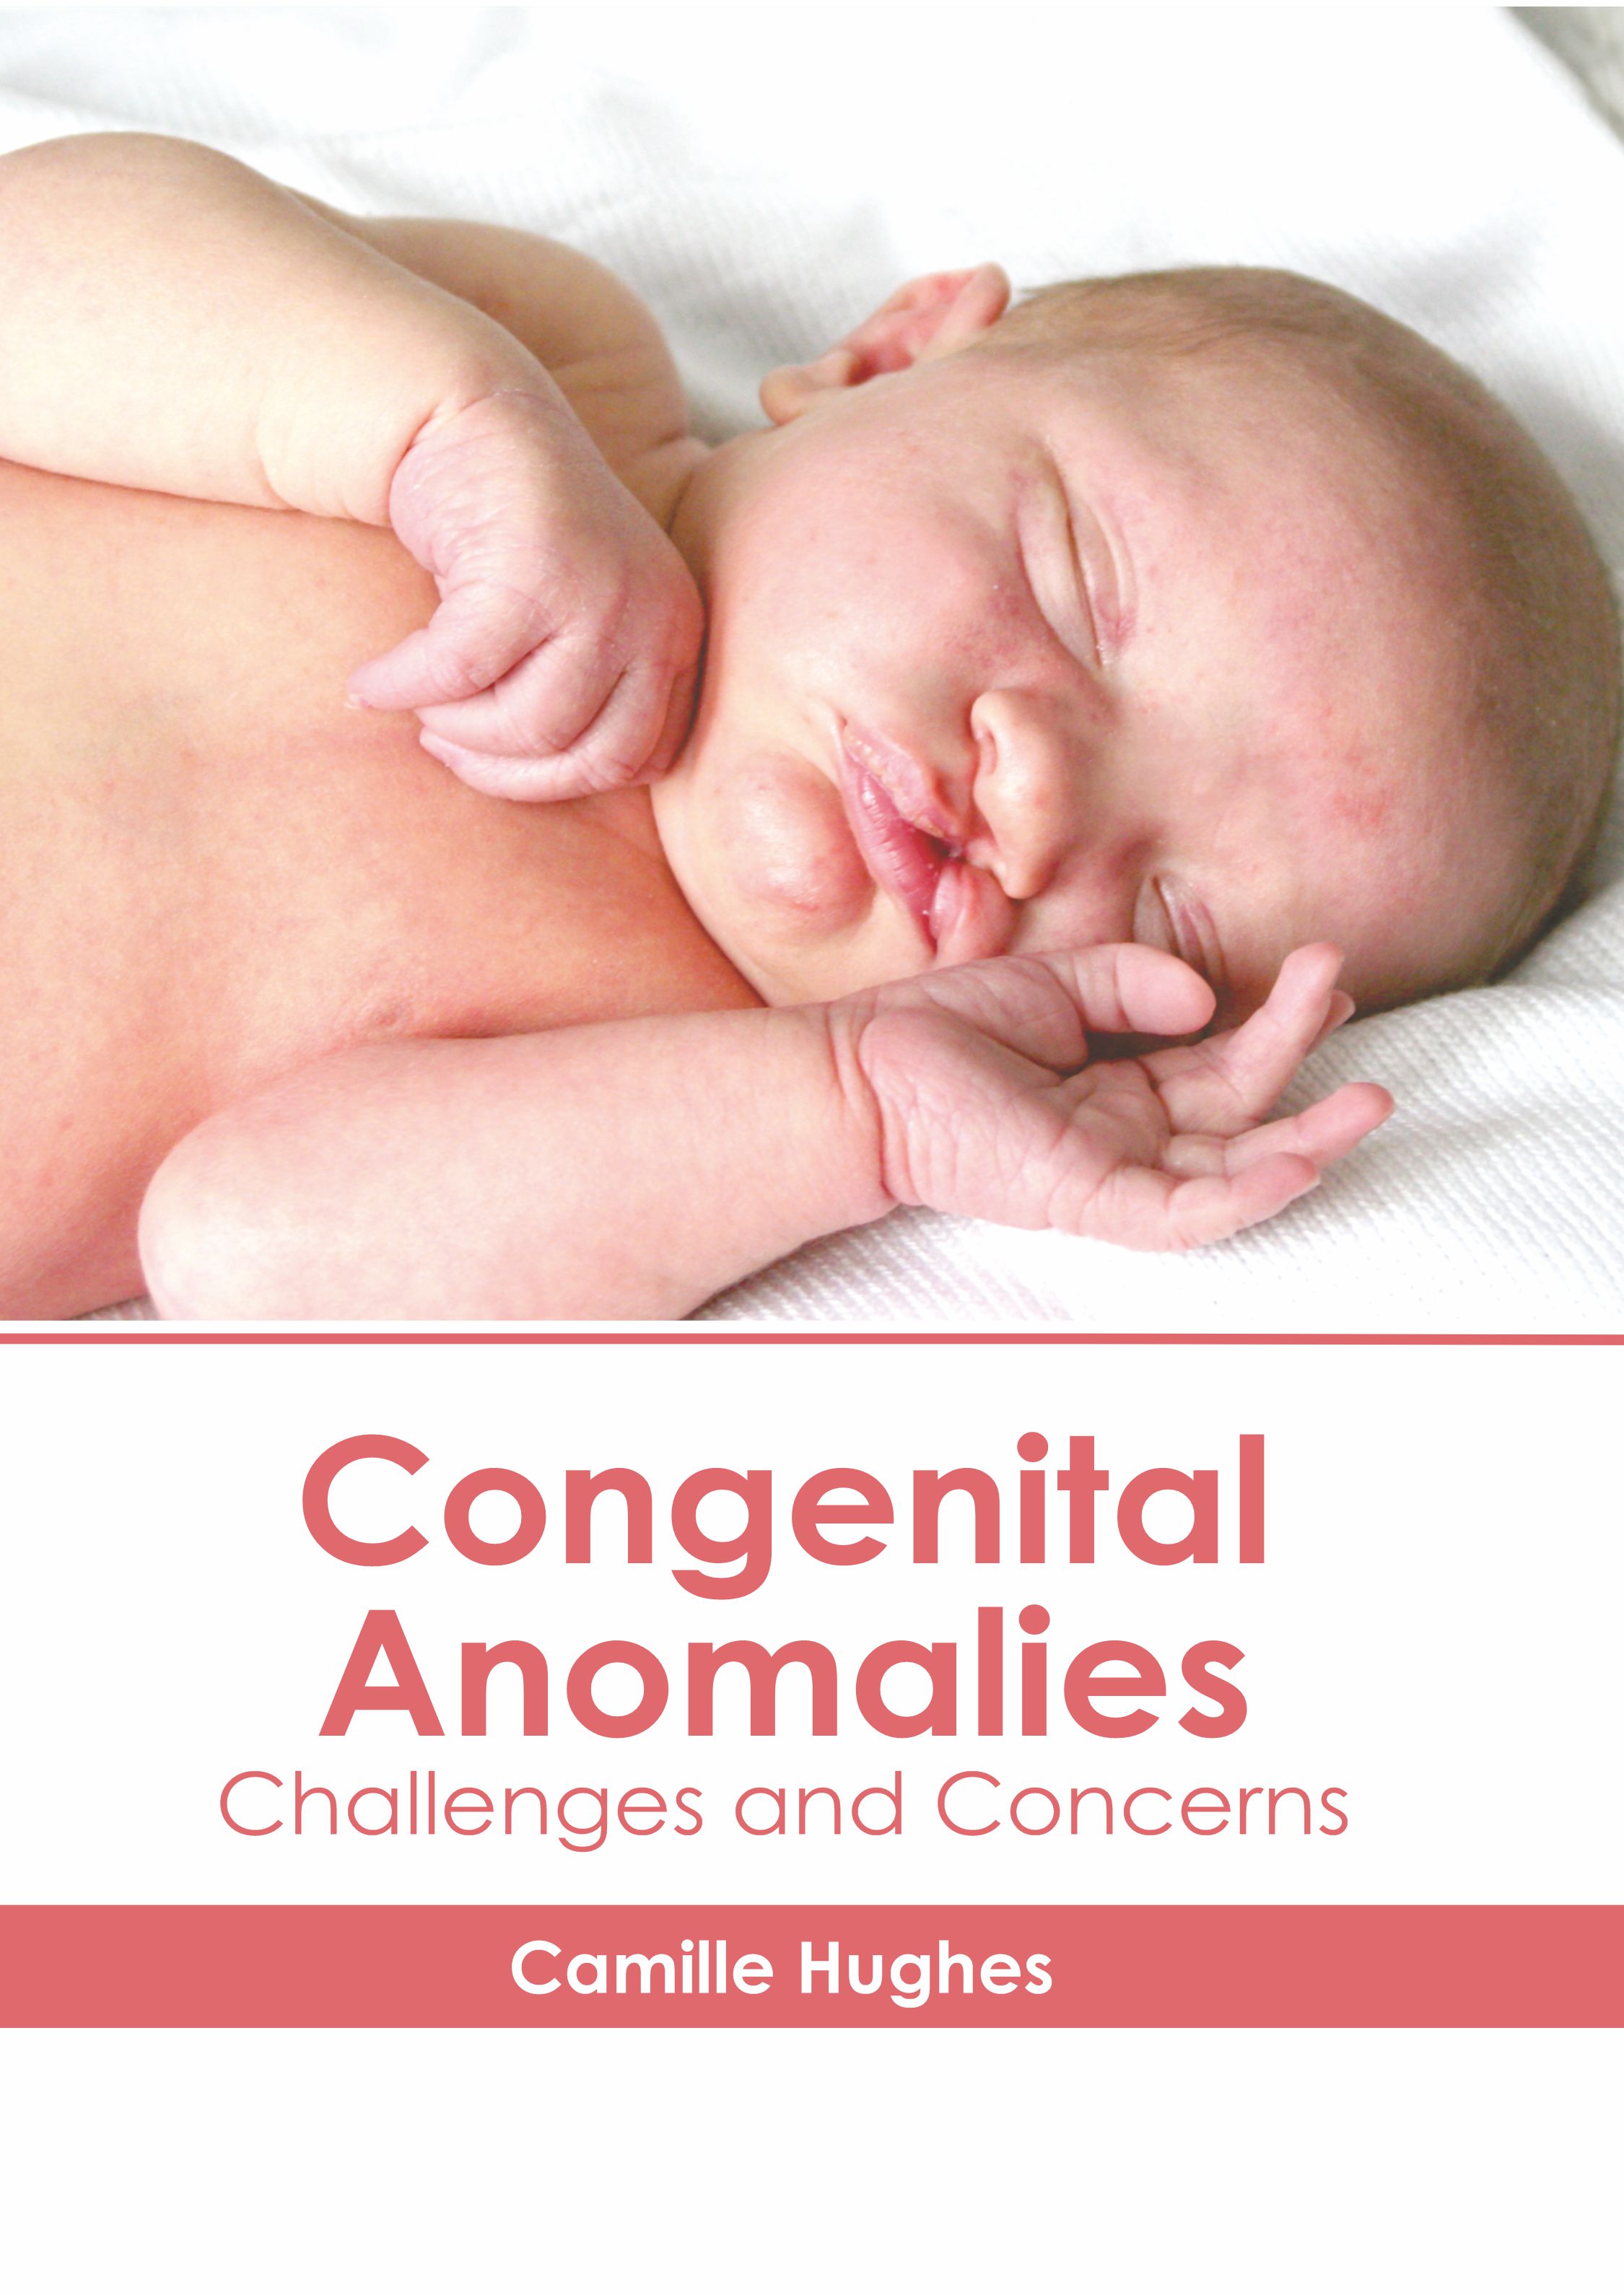 
exclusive-publishers/american-medical-publishers/congenital-anomalies-challenges-and-concerns-9781639274192